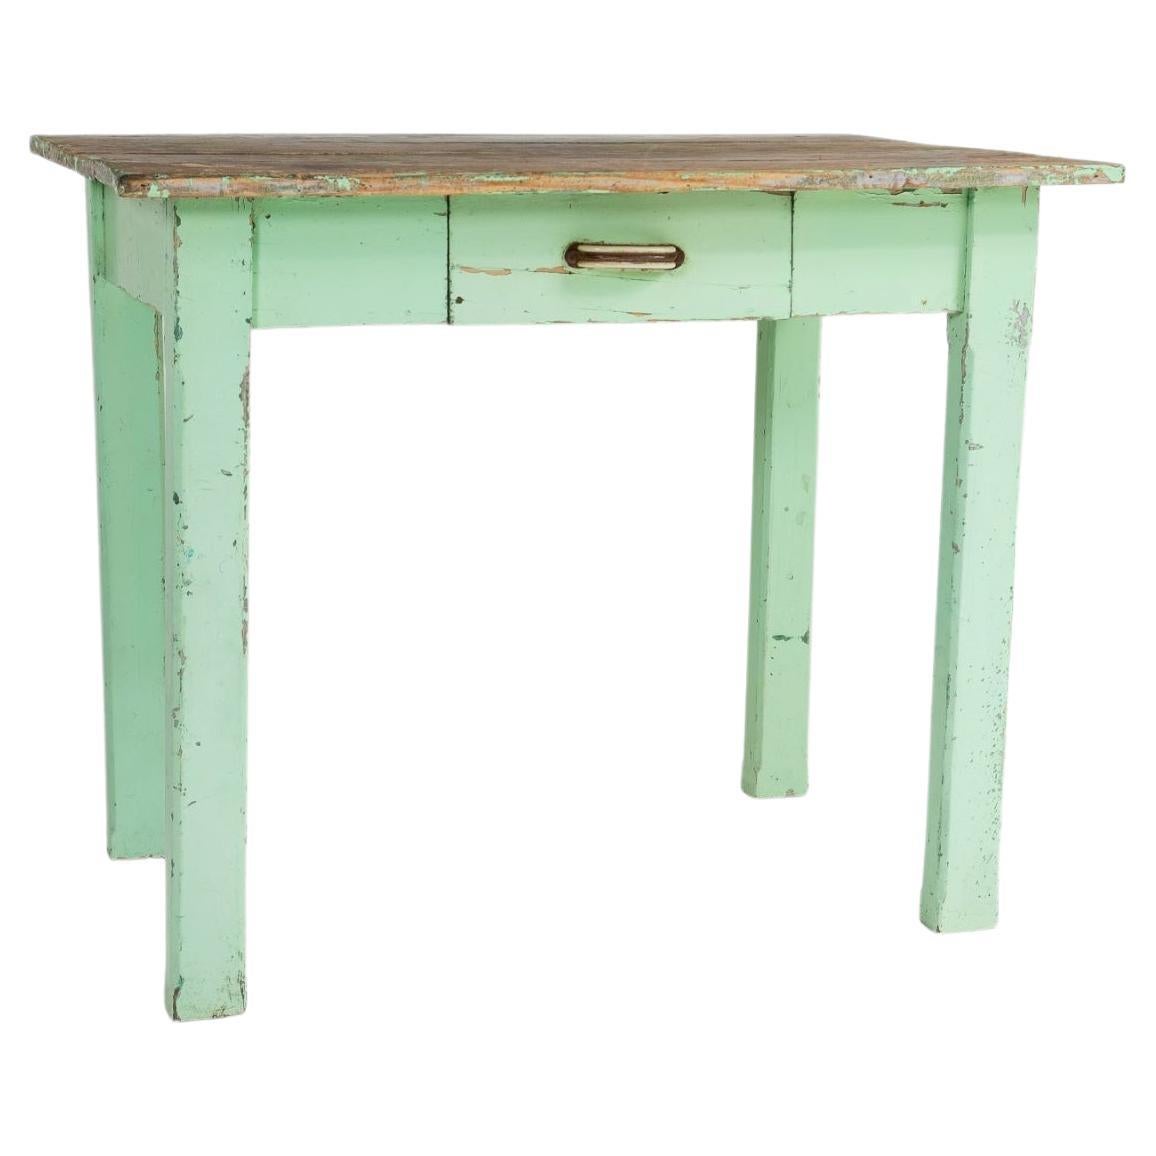 Small Original Rustic Green Painted Pine Farmhouse Table or Writing Table Desk